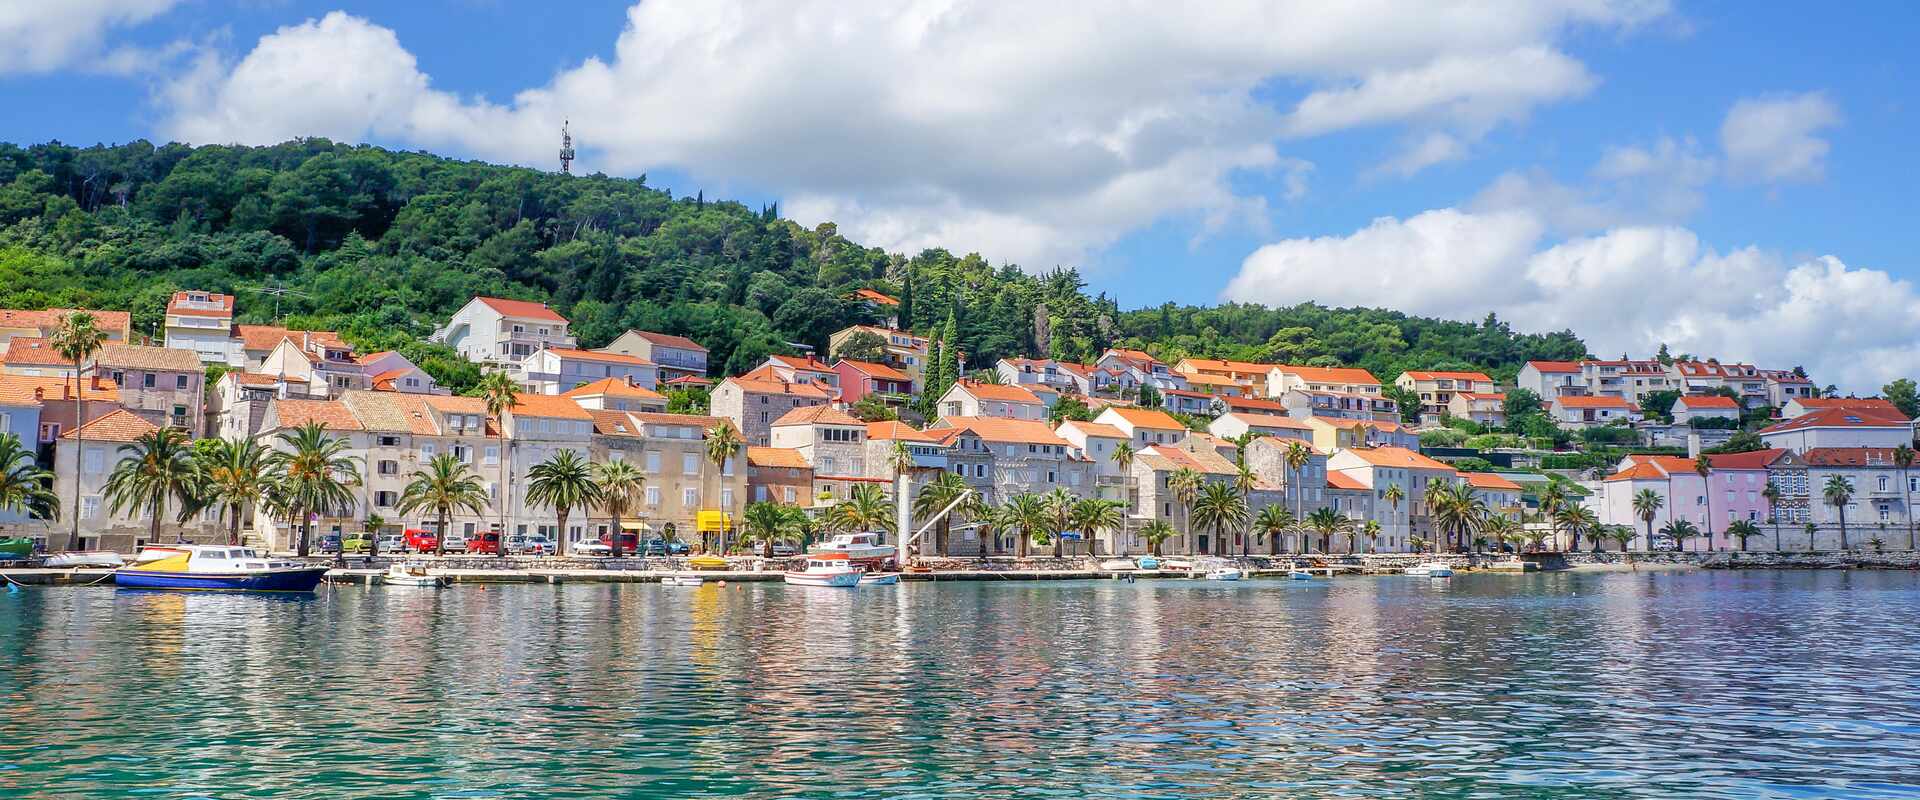 Historic town of Korcula